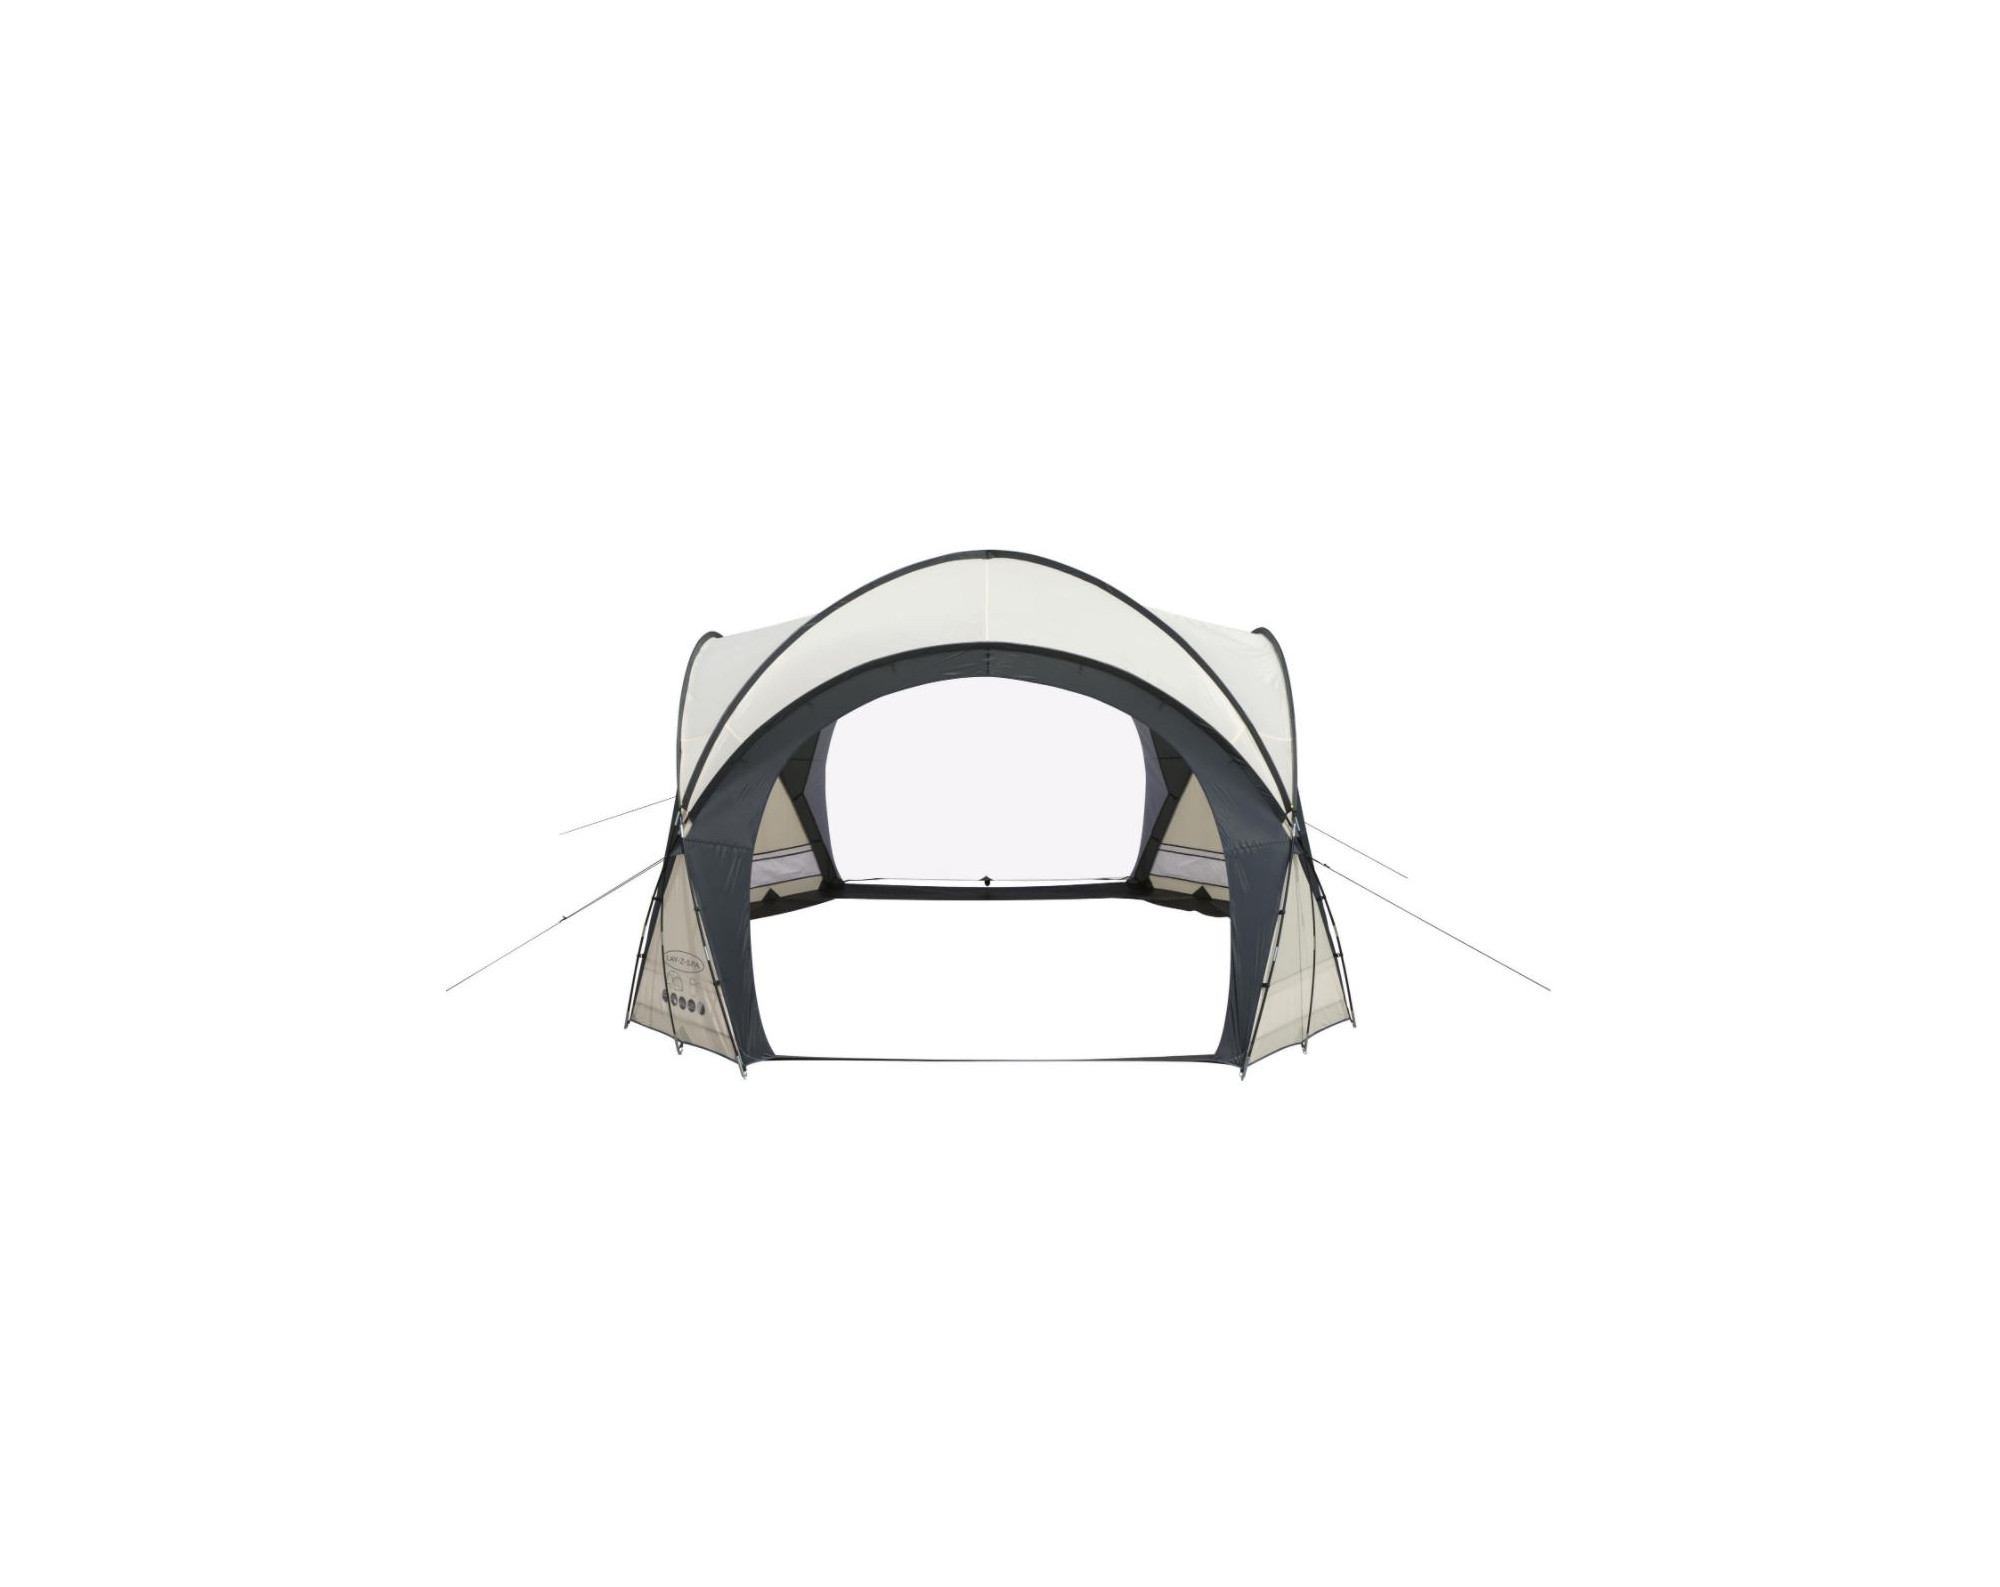 3.90m x 3.90m x 2.55m Dome (Contents: Tent, Carry Bag, Twenty pegs, One Layers, 1000mmH2O)